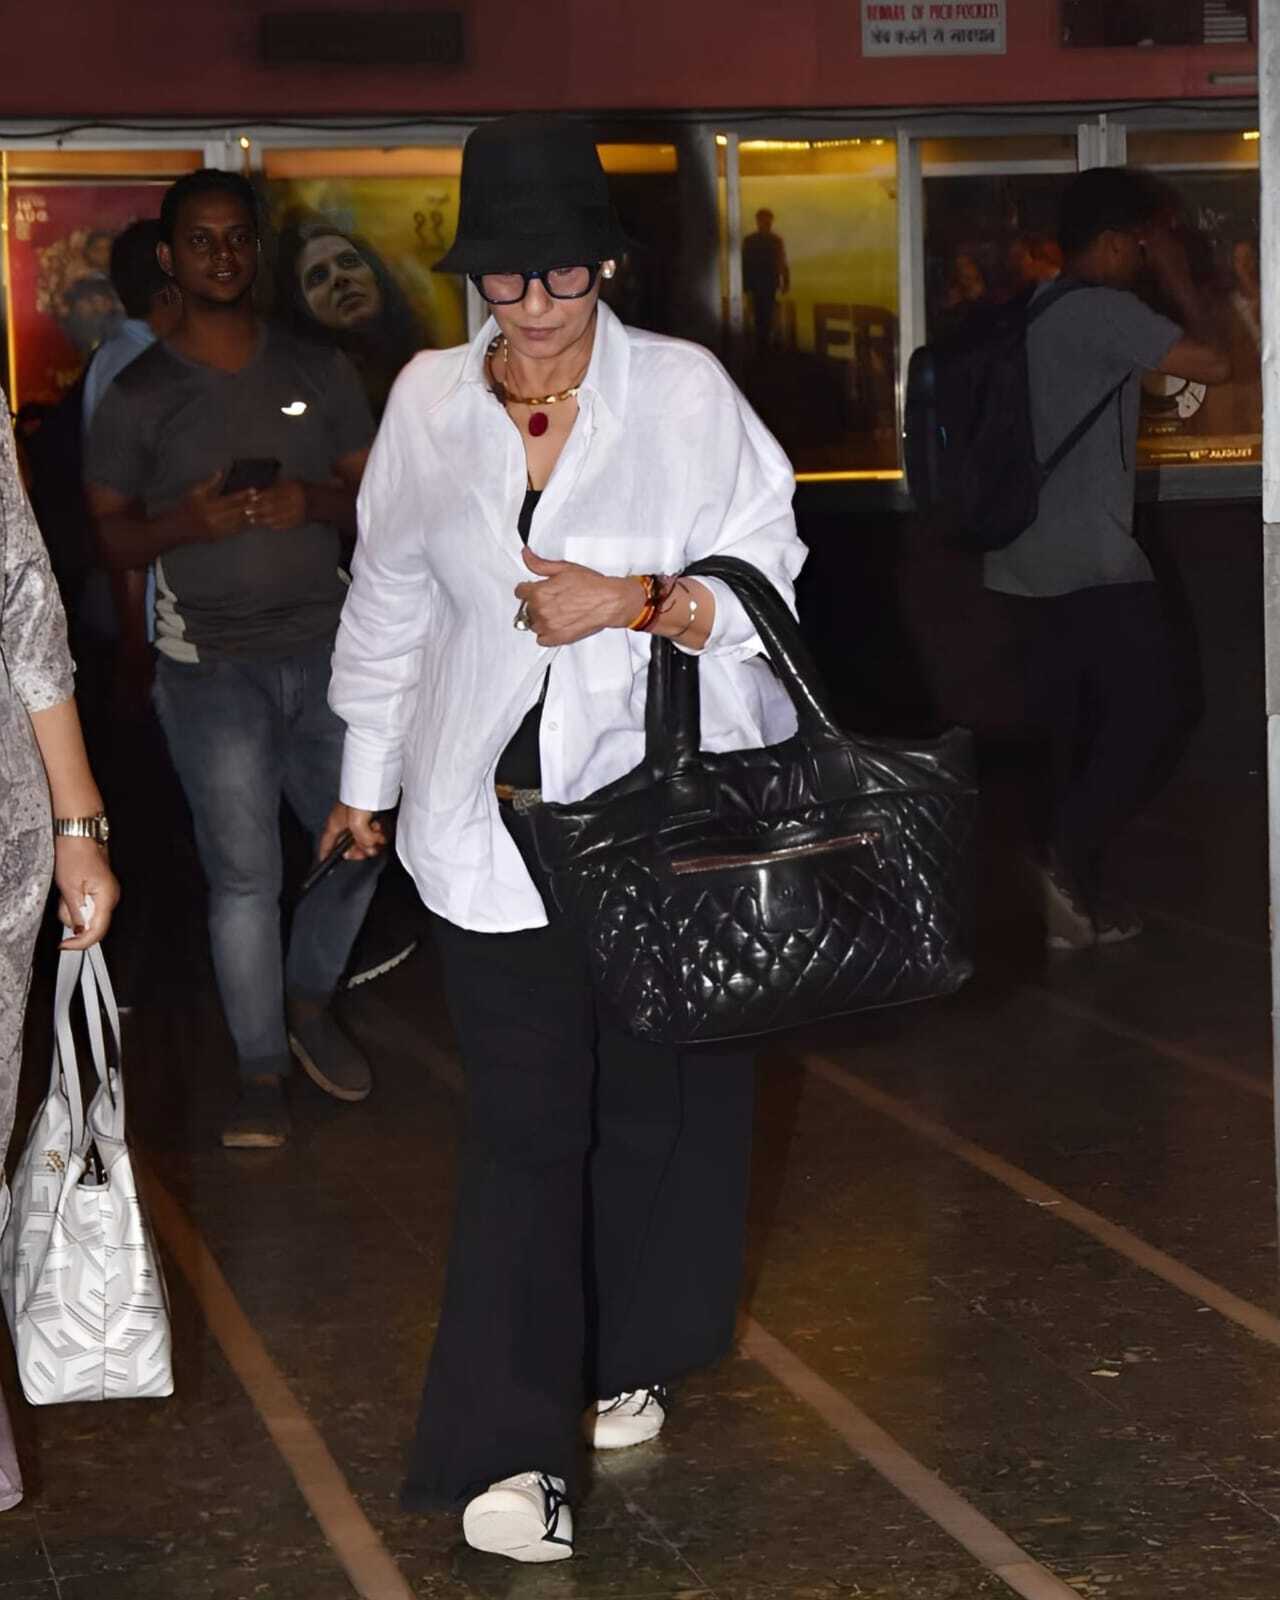 Dimple watched Sunny Deol's Gadar 2. She was seen exiting from Gaiety Galaxy. The veteran actress rushed out on spotting the paparazzi